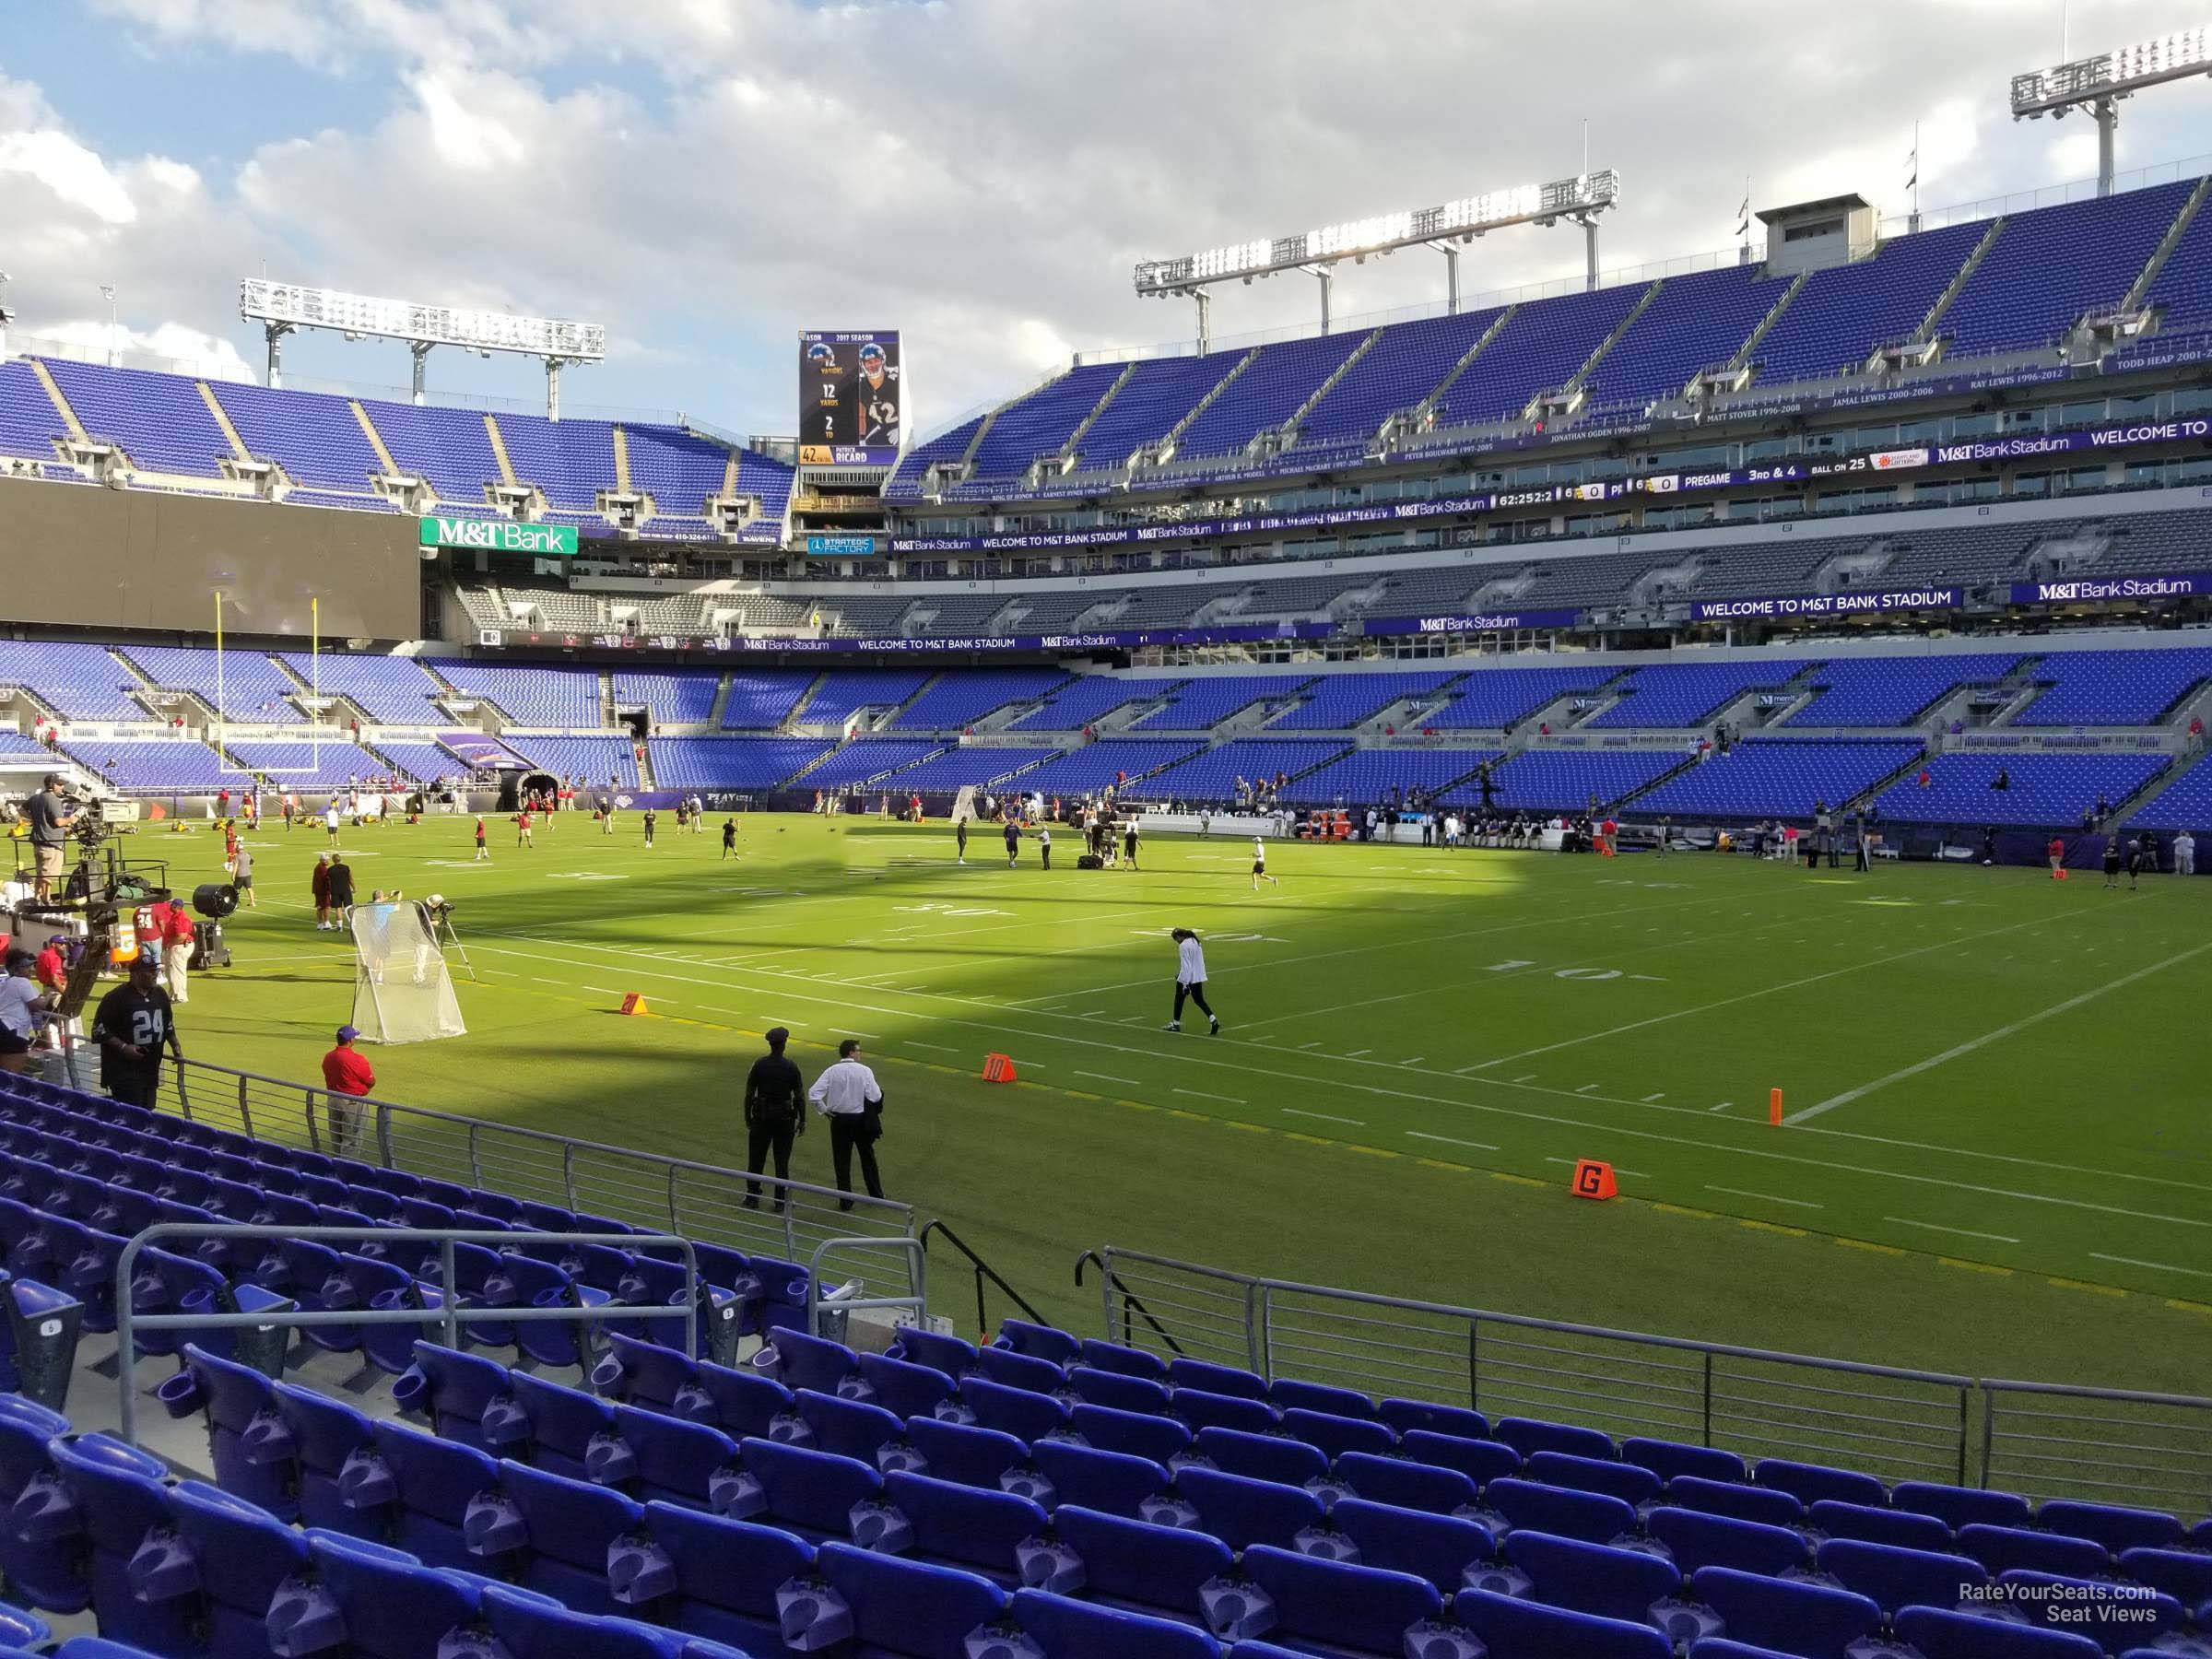 section 148, row 11 seat view  for football - m&t bank stadium